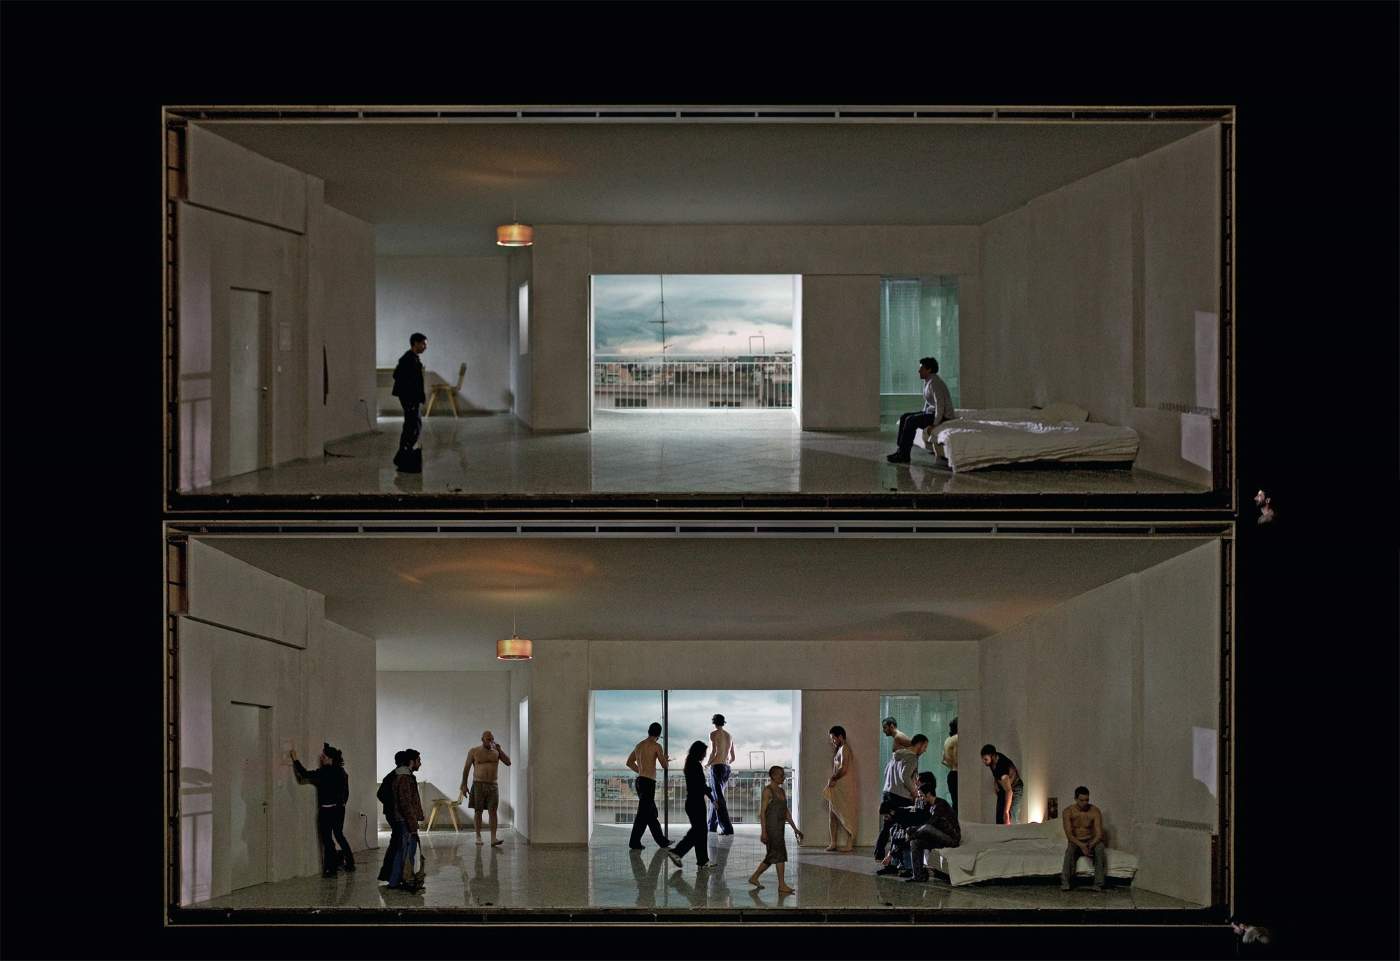 Rome, the Cloud becomes a home environment for Dimitris Papaioannou's video-performance installation